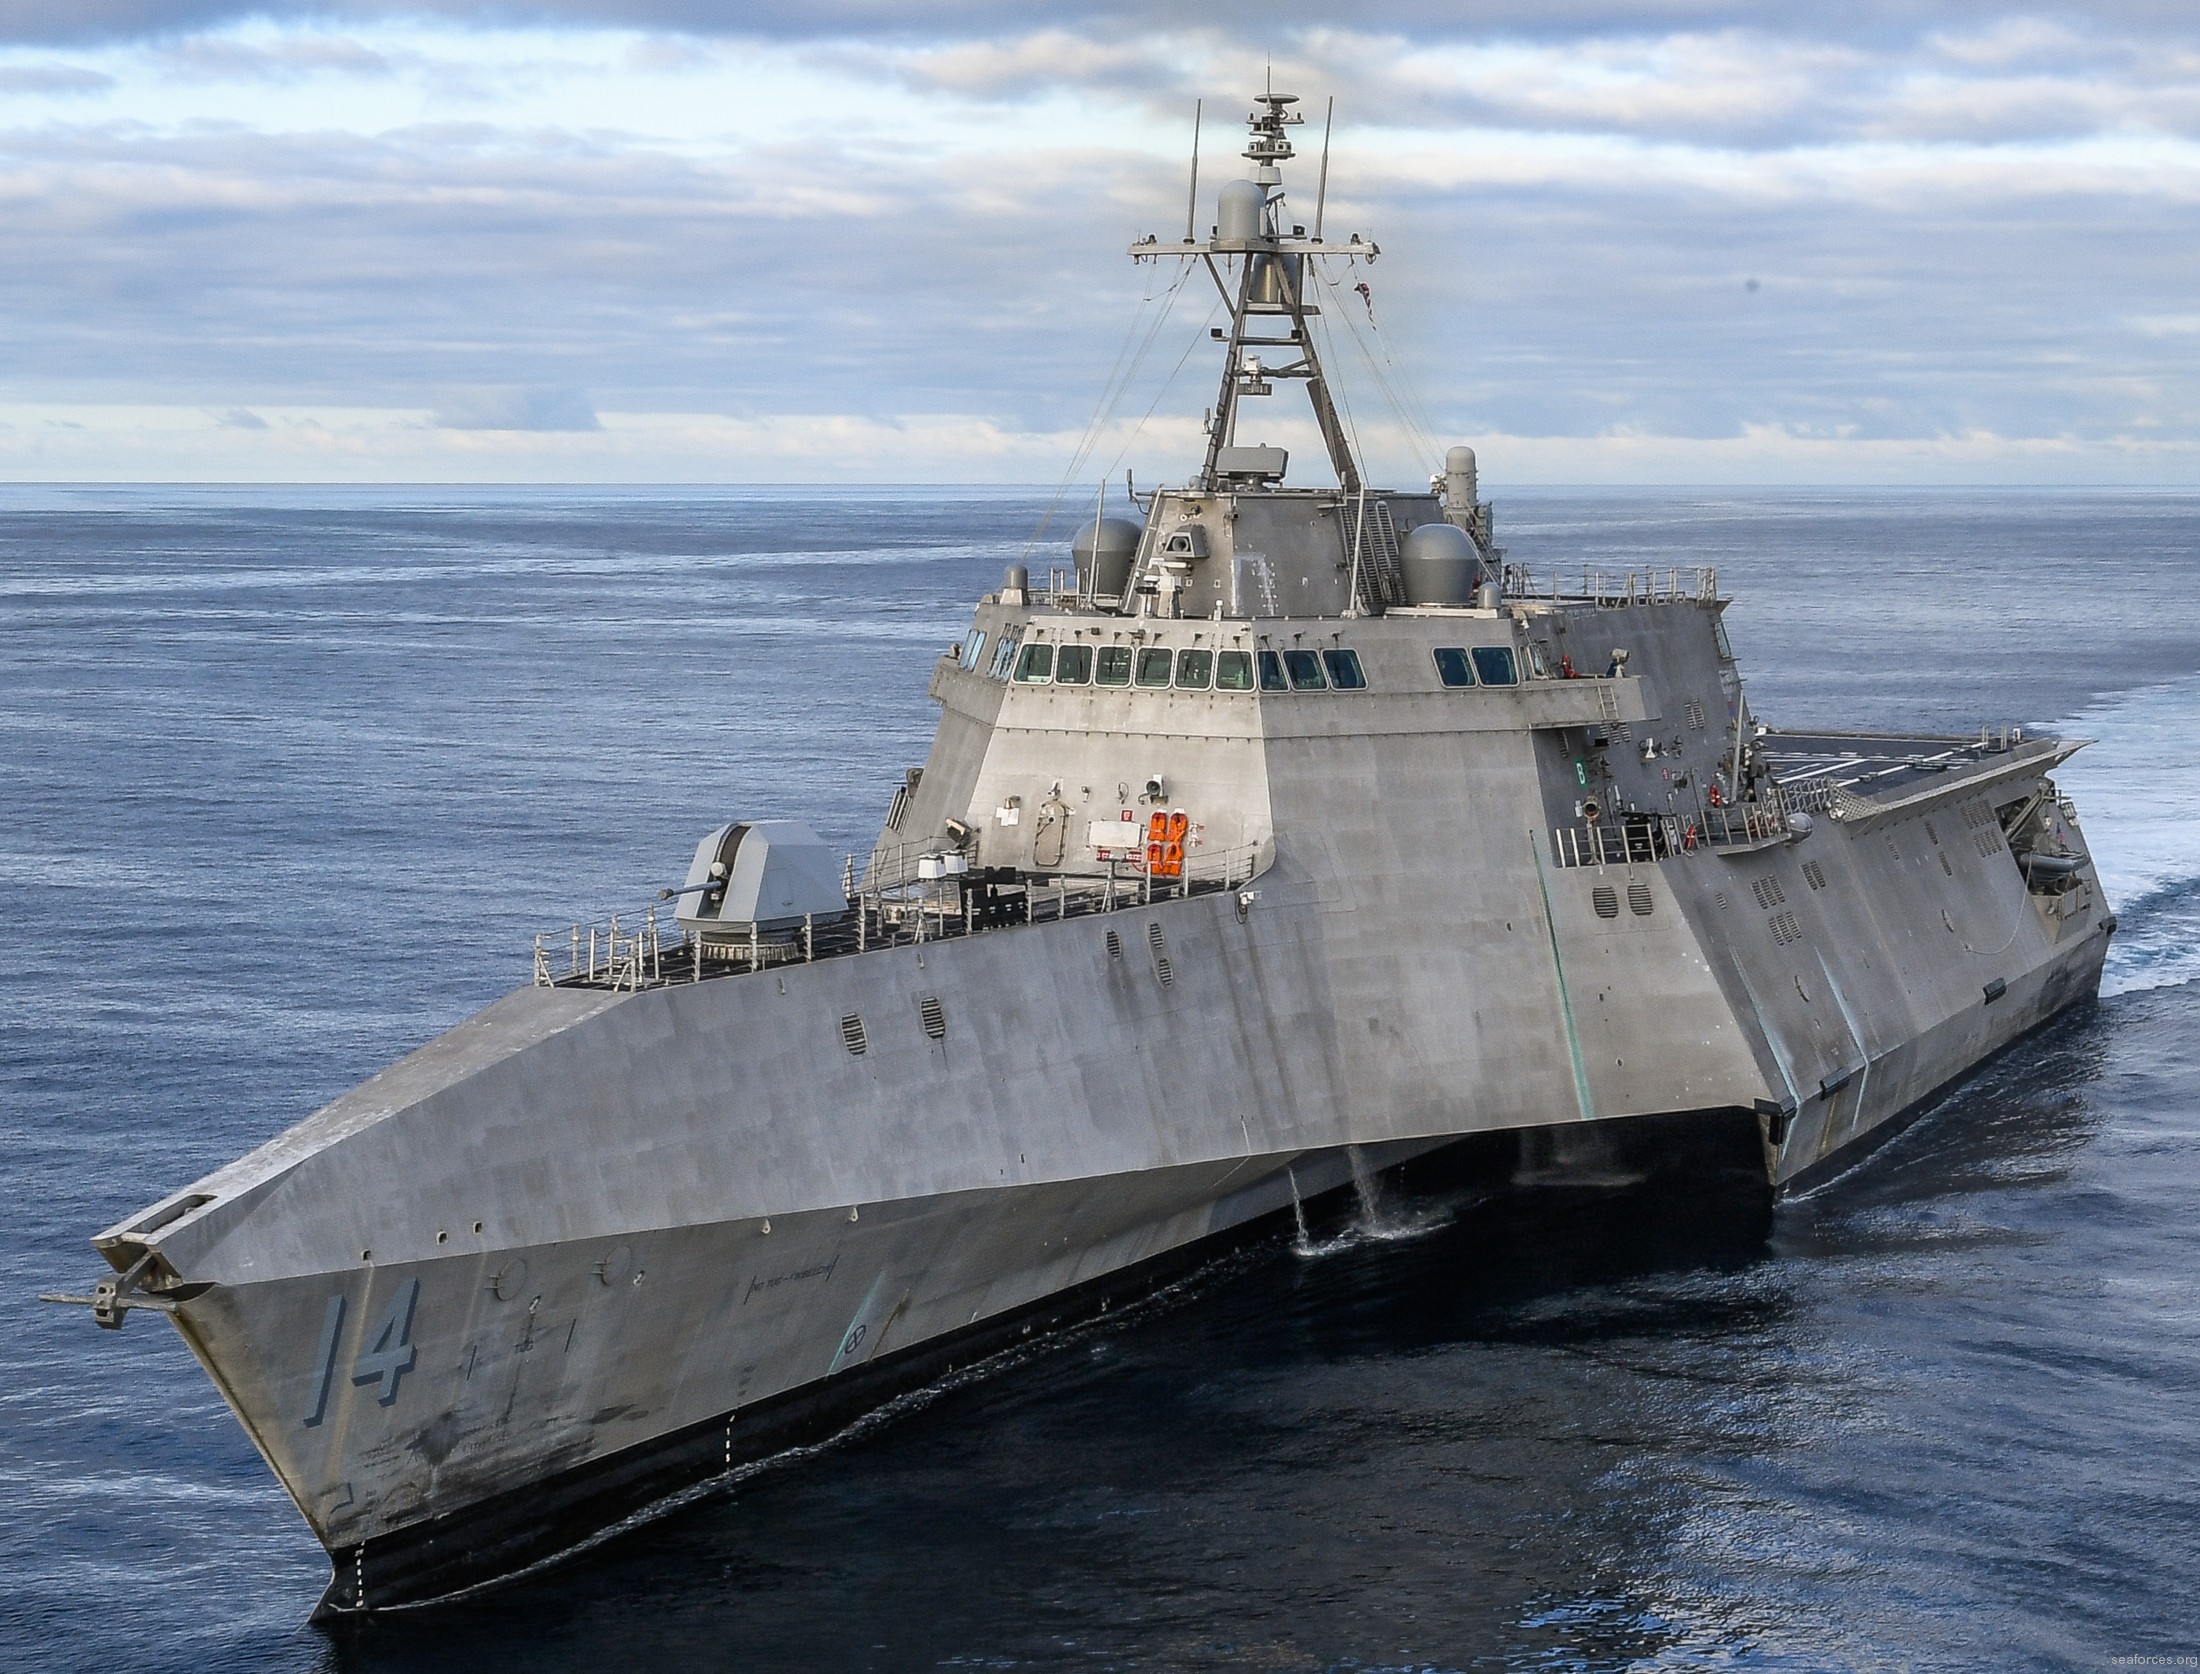 lcs-14 uss manchester littoral combat ship independence class us navy 14x austal mobile